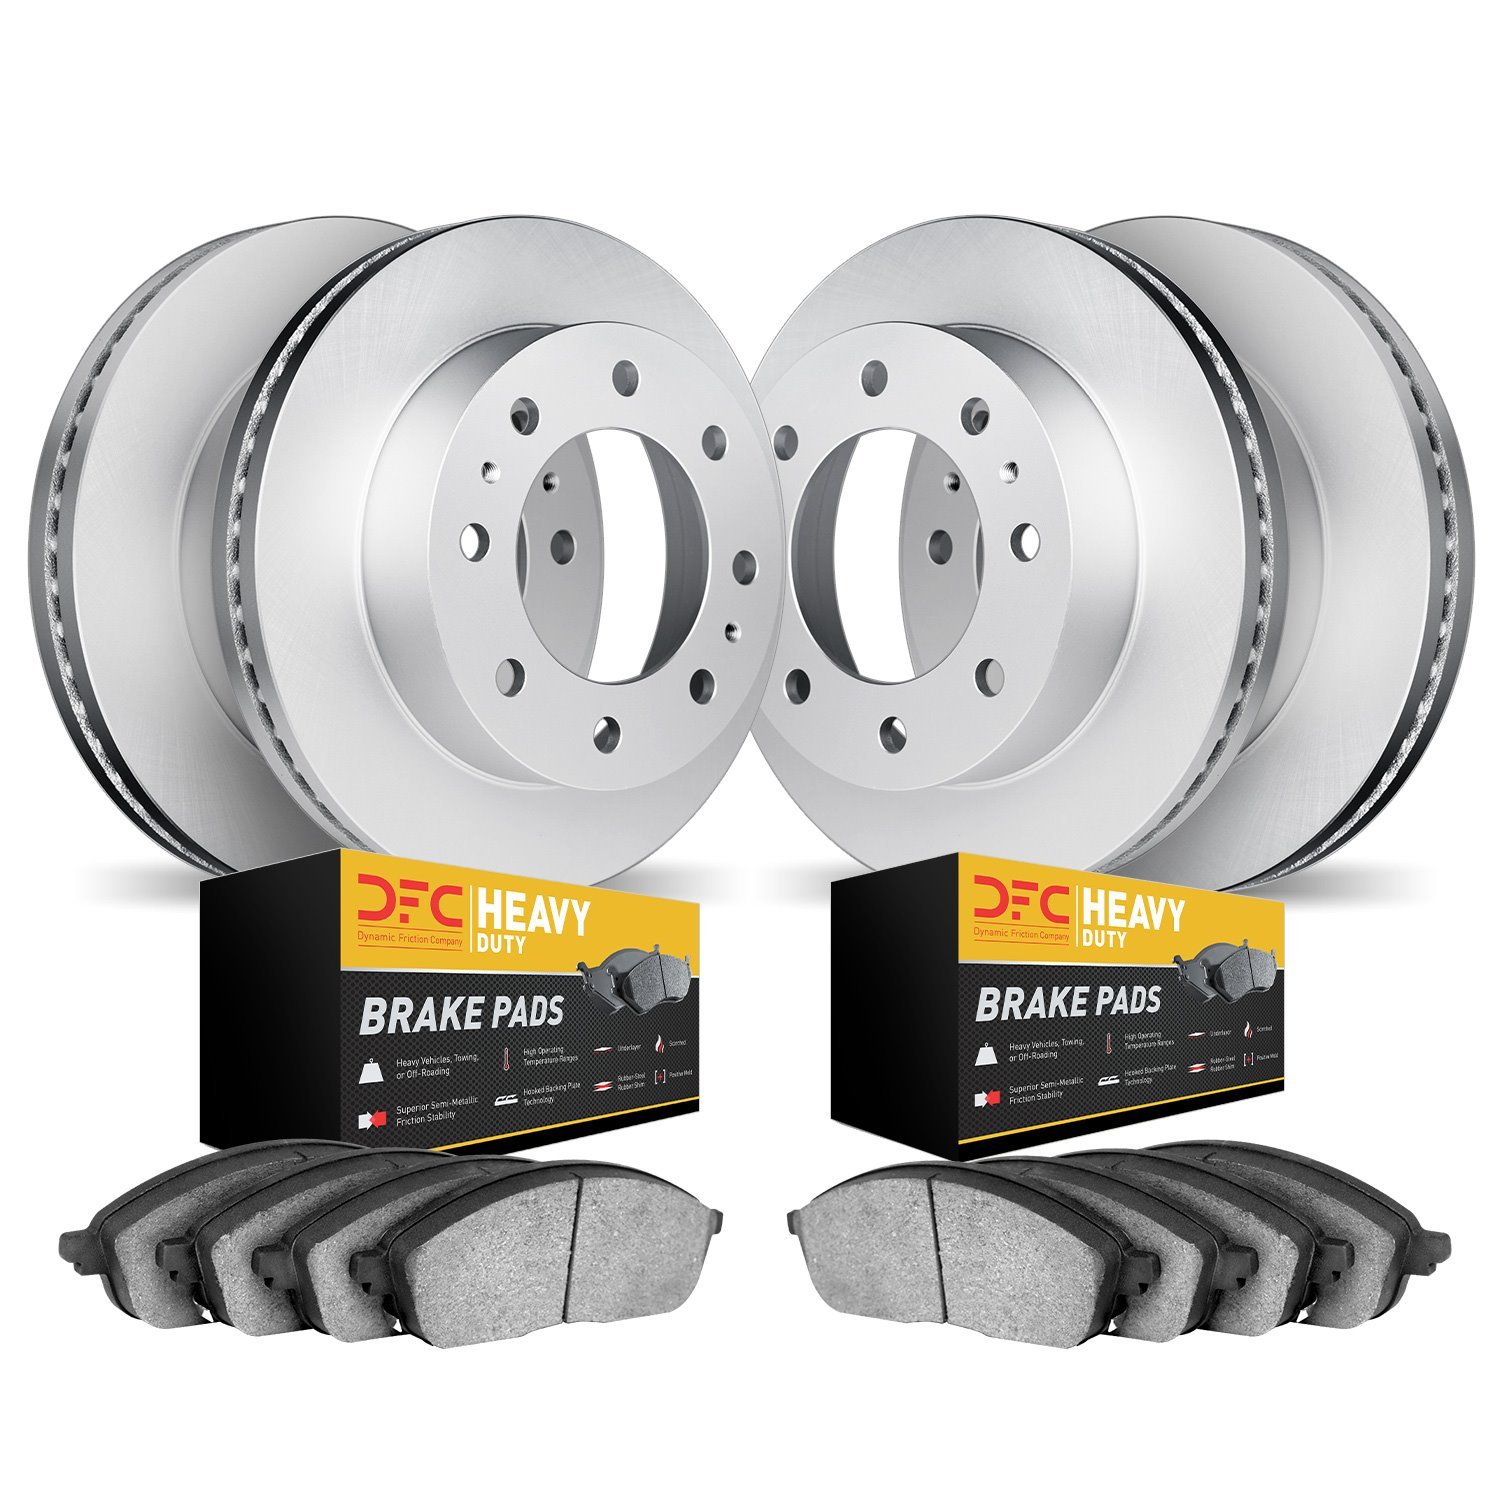 4204-54047 Geospec Brake Rotors w/Heavy-Duty Brake Pads Kit, 2010-2012 Ford/Lincoln/Mercury/Mazda, Position: Front and Rear